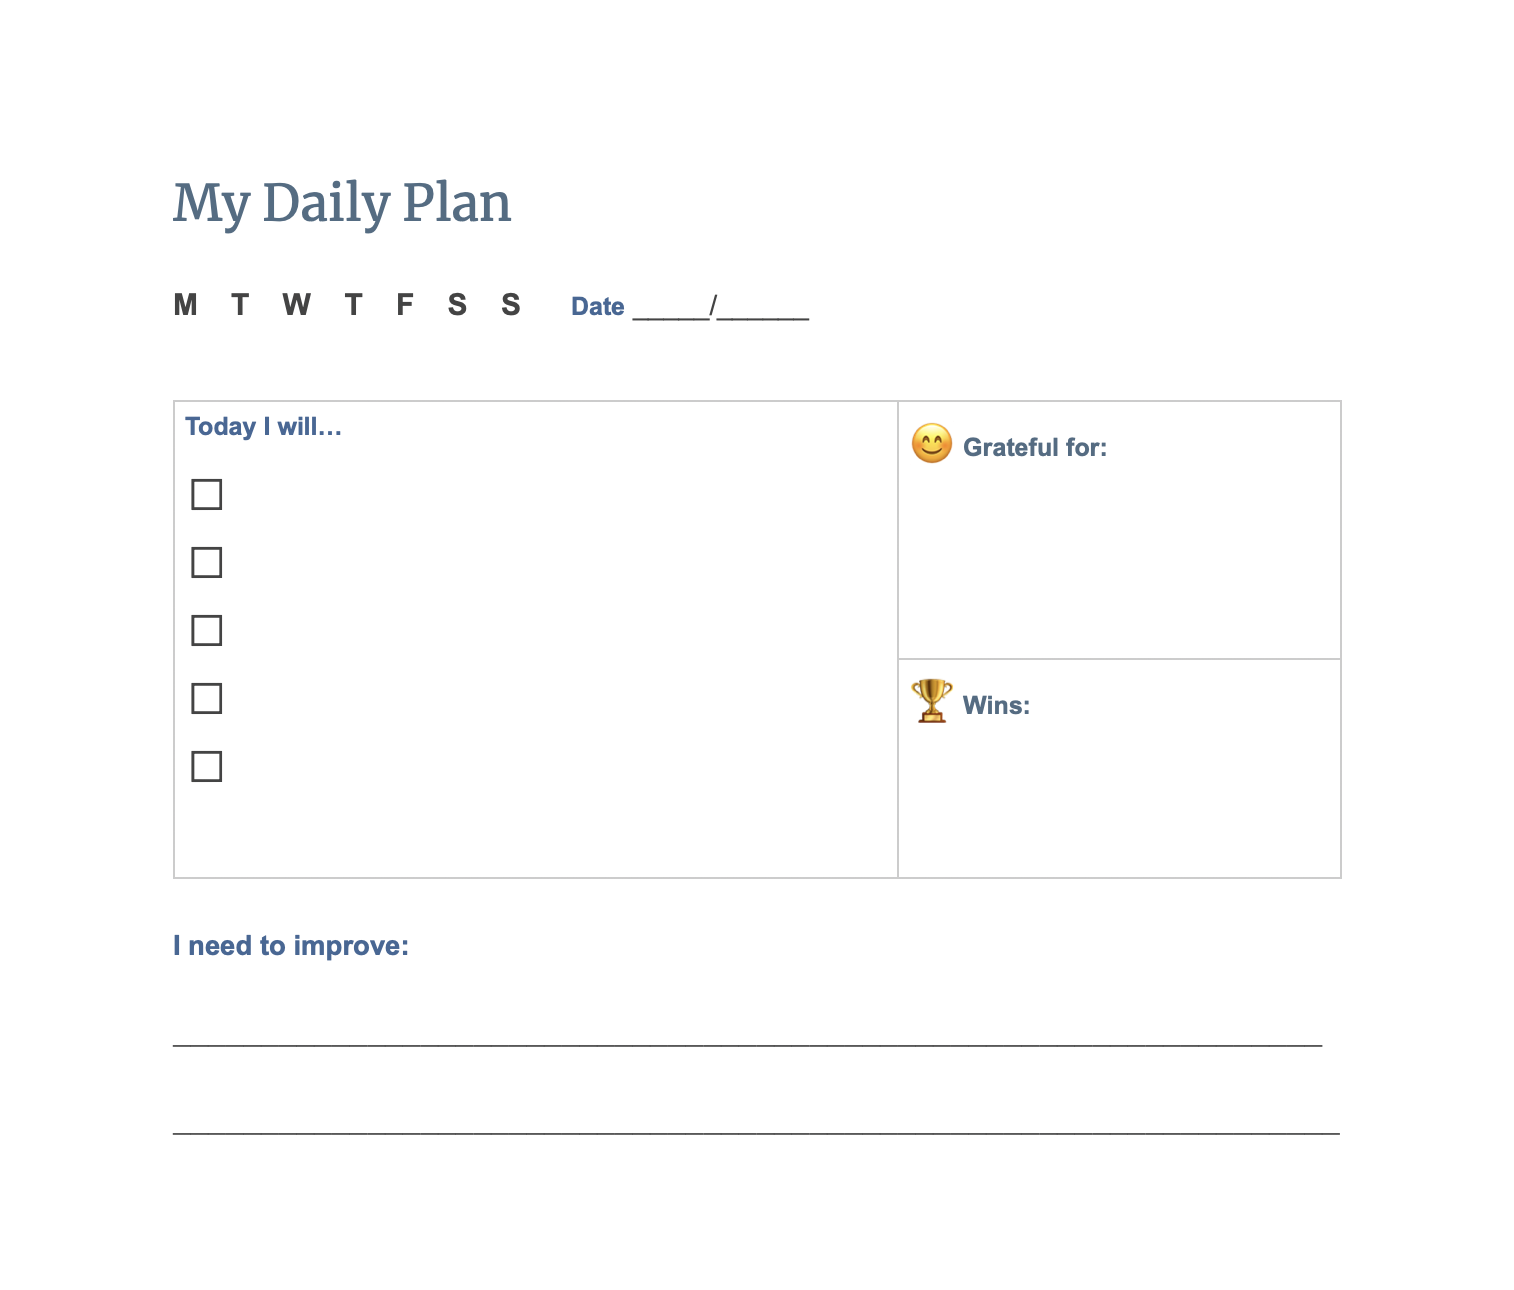 A daily planning and goal setting template for students, including spaces for a checklist of tasks, areas of improvement, and spaces to write a few words about what the student is grateful for and a "win" for the day.